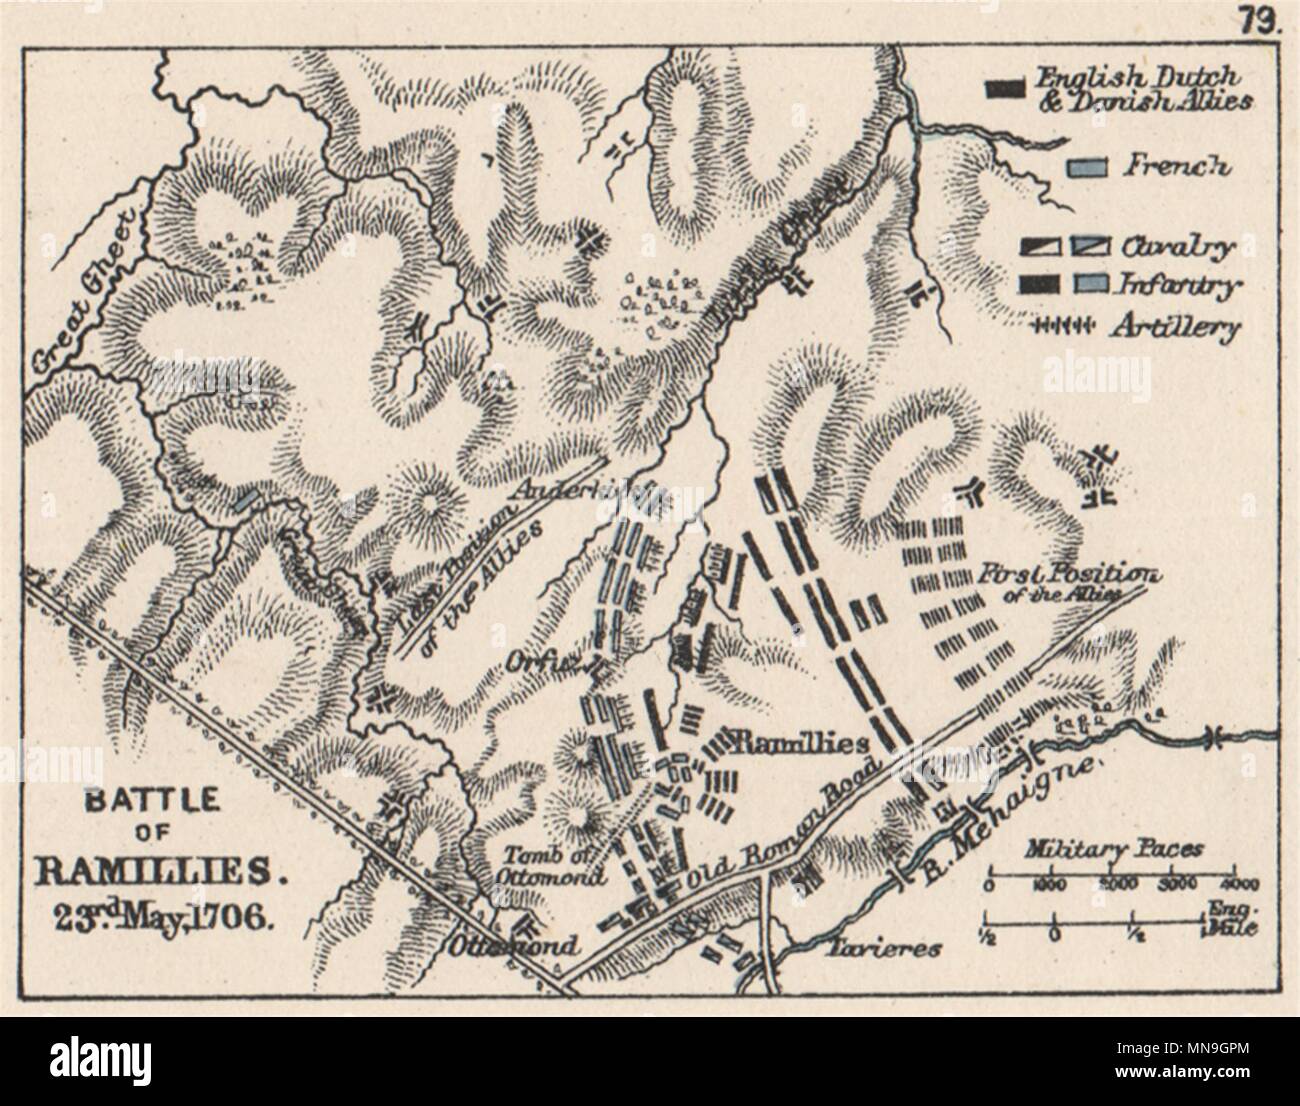 WAR OF SPANISH SUCCESSION. Battle of Ramillies 23rd May 1706. SMALL 1907 map Stock Photo